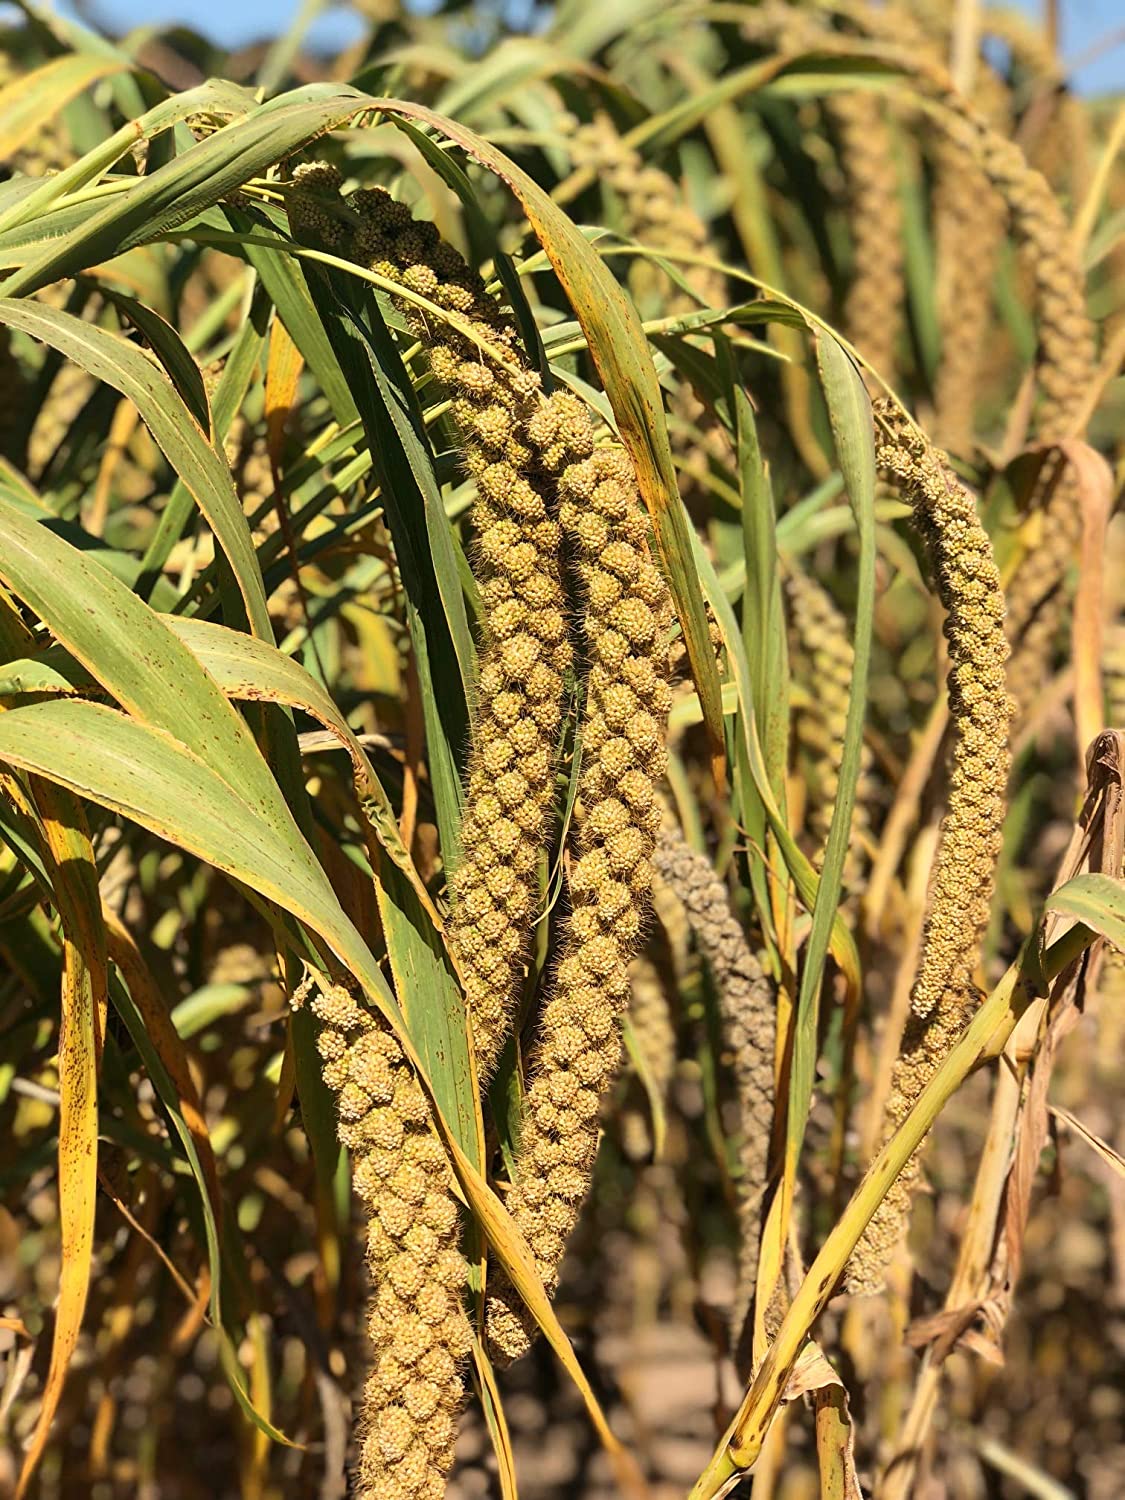 big stalks of golden millet shown growing in the field, ready to harvest